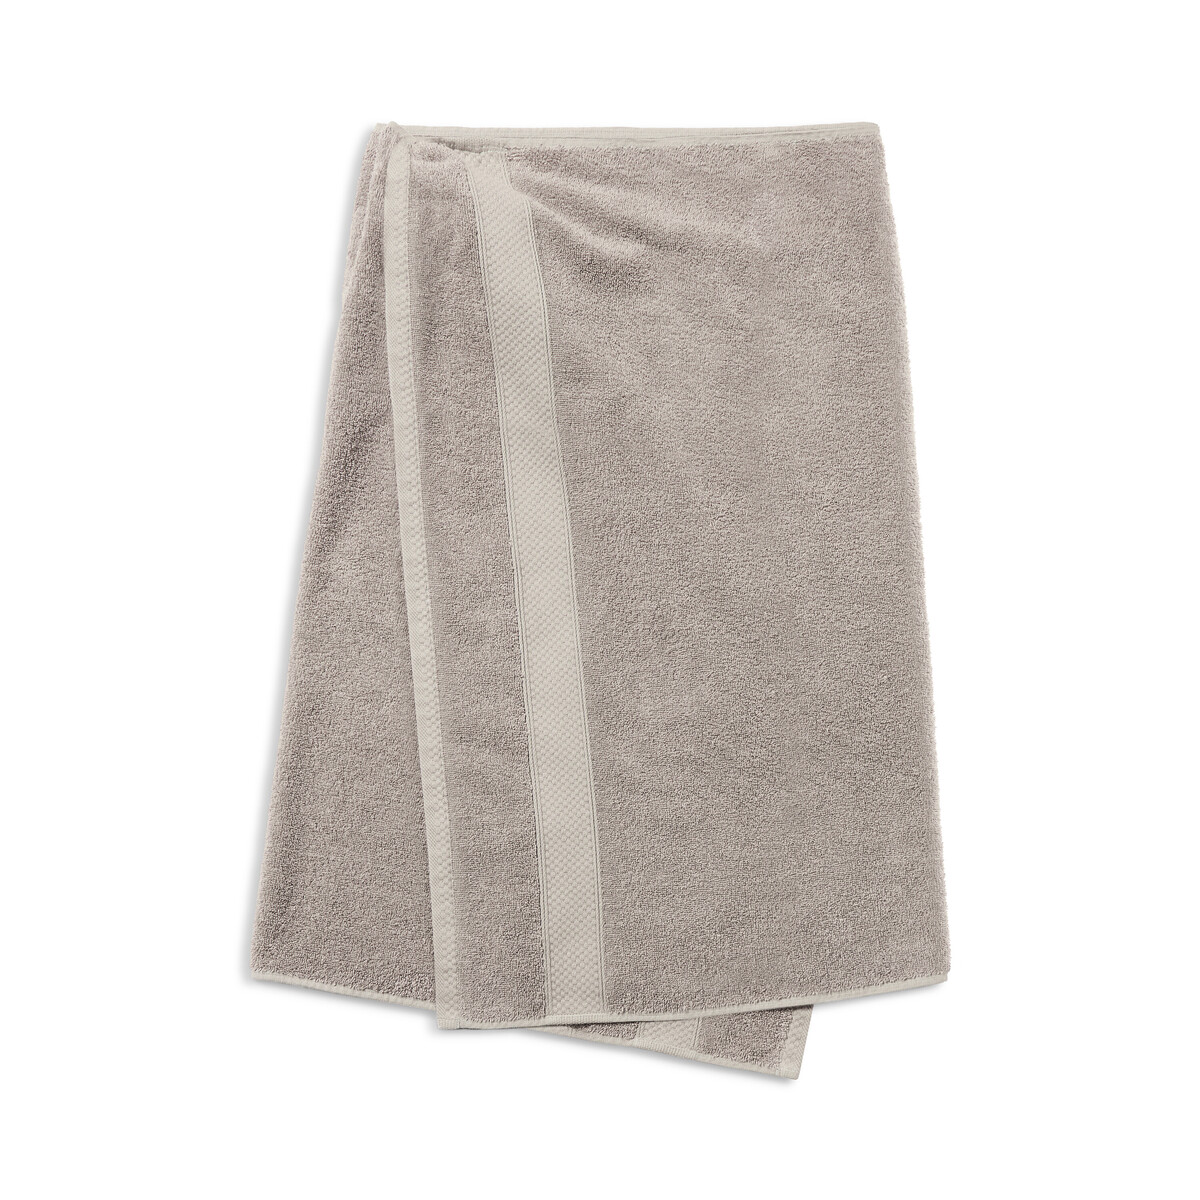 LOOK: Balenciaga Sells Towel Skirt for Over P50,000 | Preview.ph